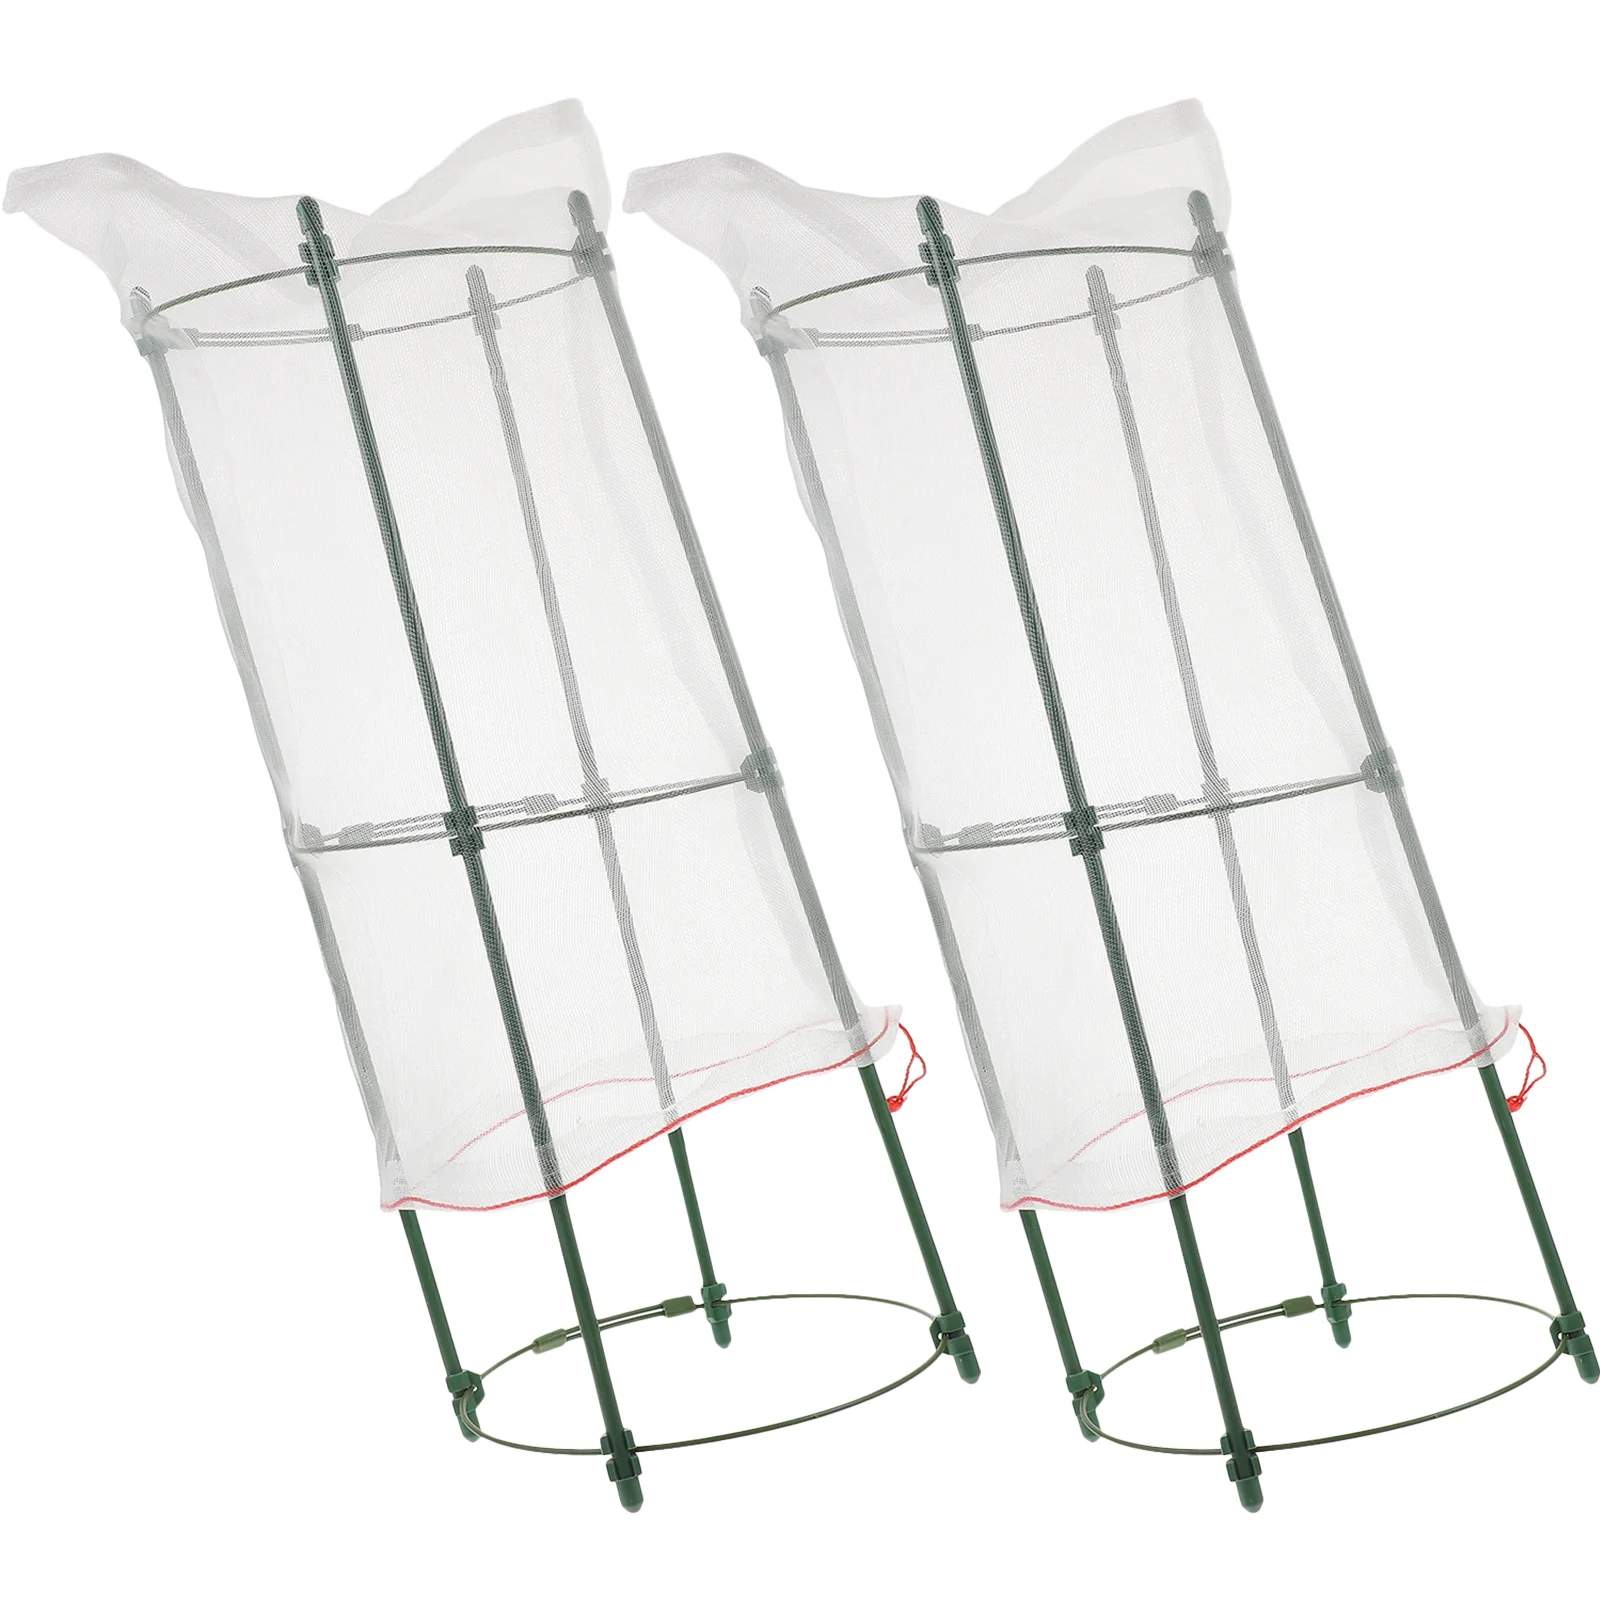 

2 Sets Seedling Protection Cage Plant Cages Tomato Growing Garden Support Stake Climbing Stand Nylon Trellis with Mesh Bag